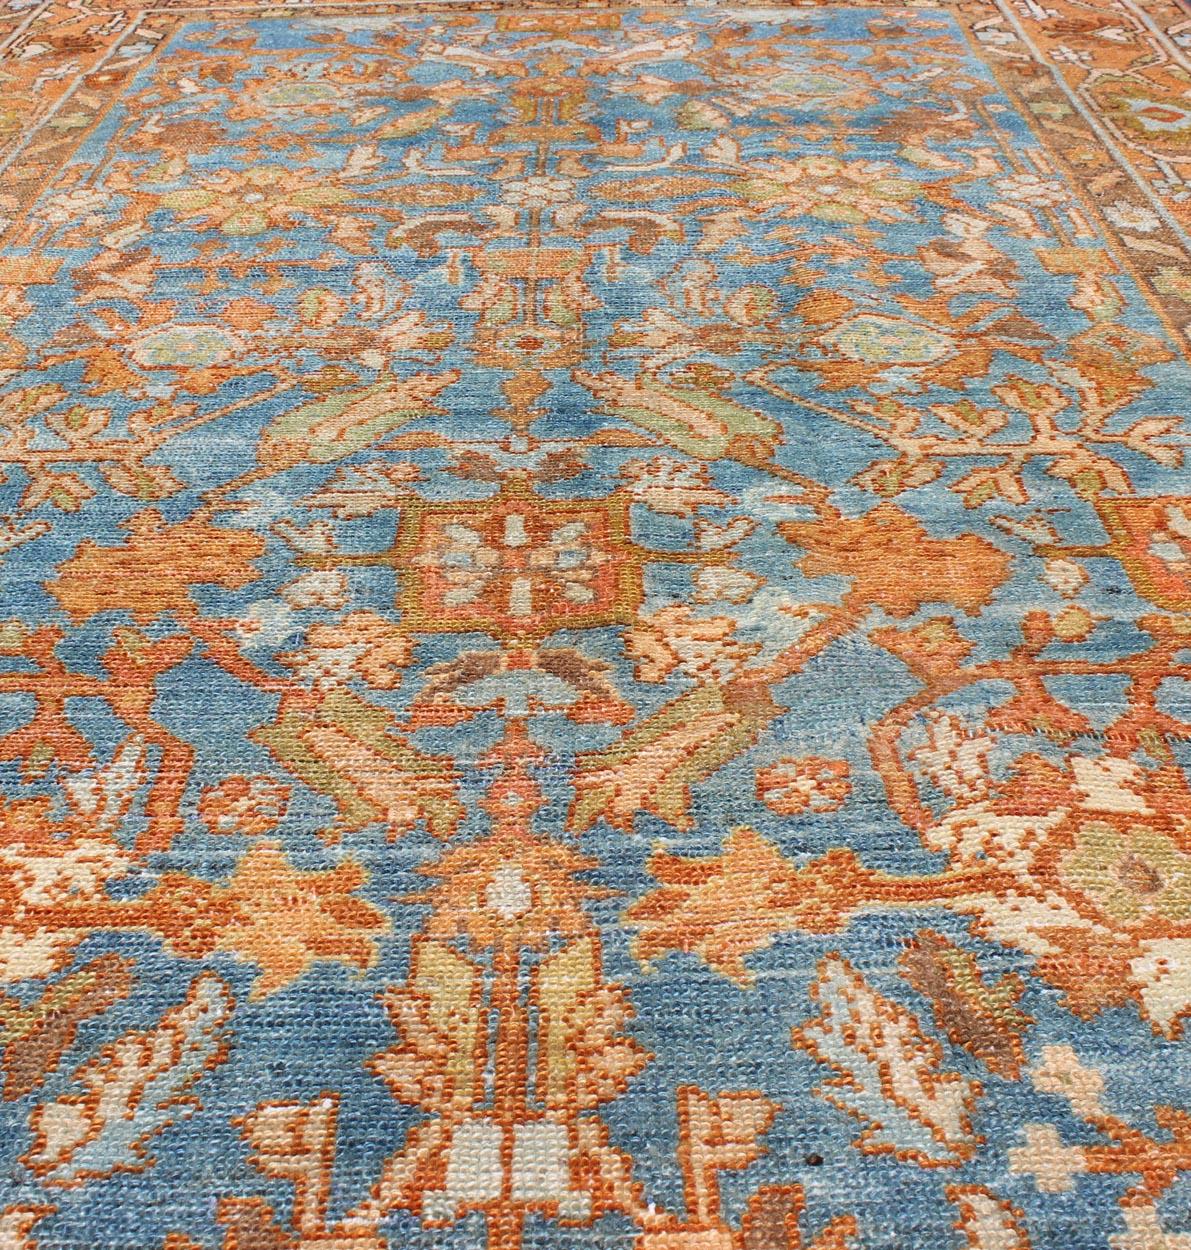 Vibrant Antique Persian Malayer Rug in Shades of Rust, Orange, and Blue For Sale 5